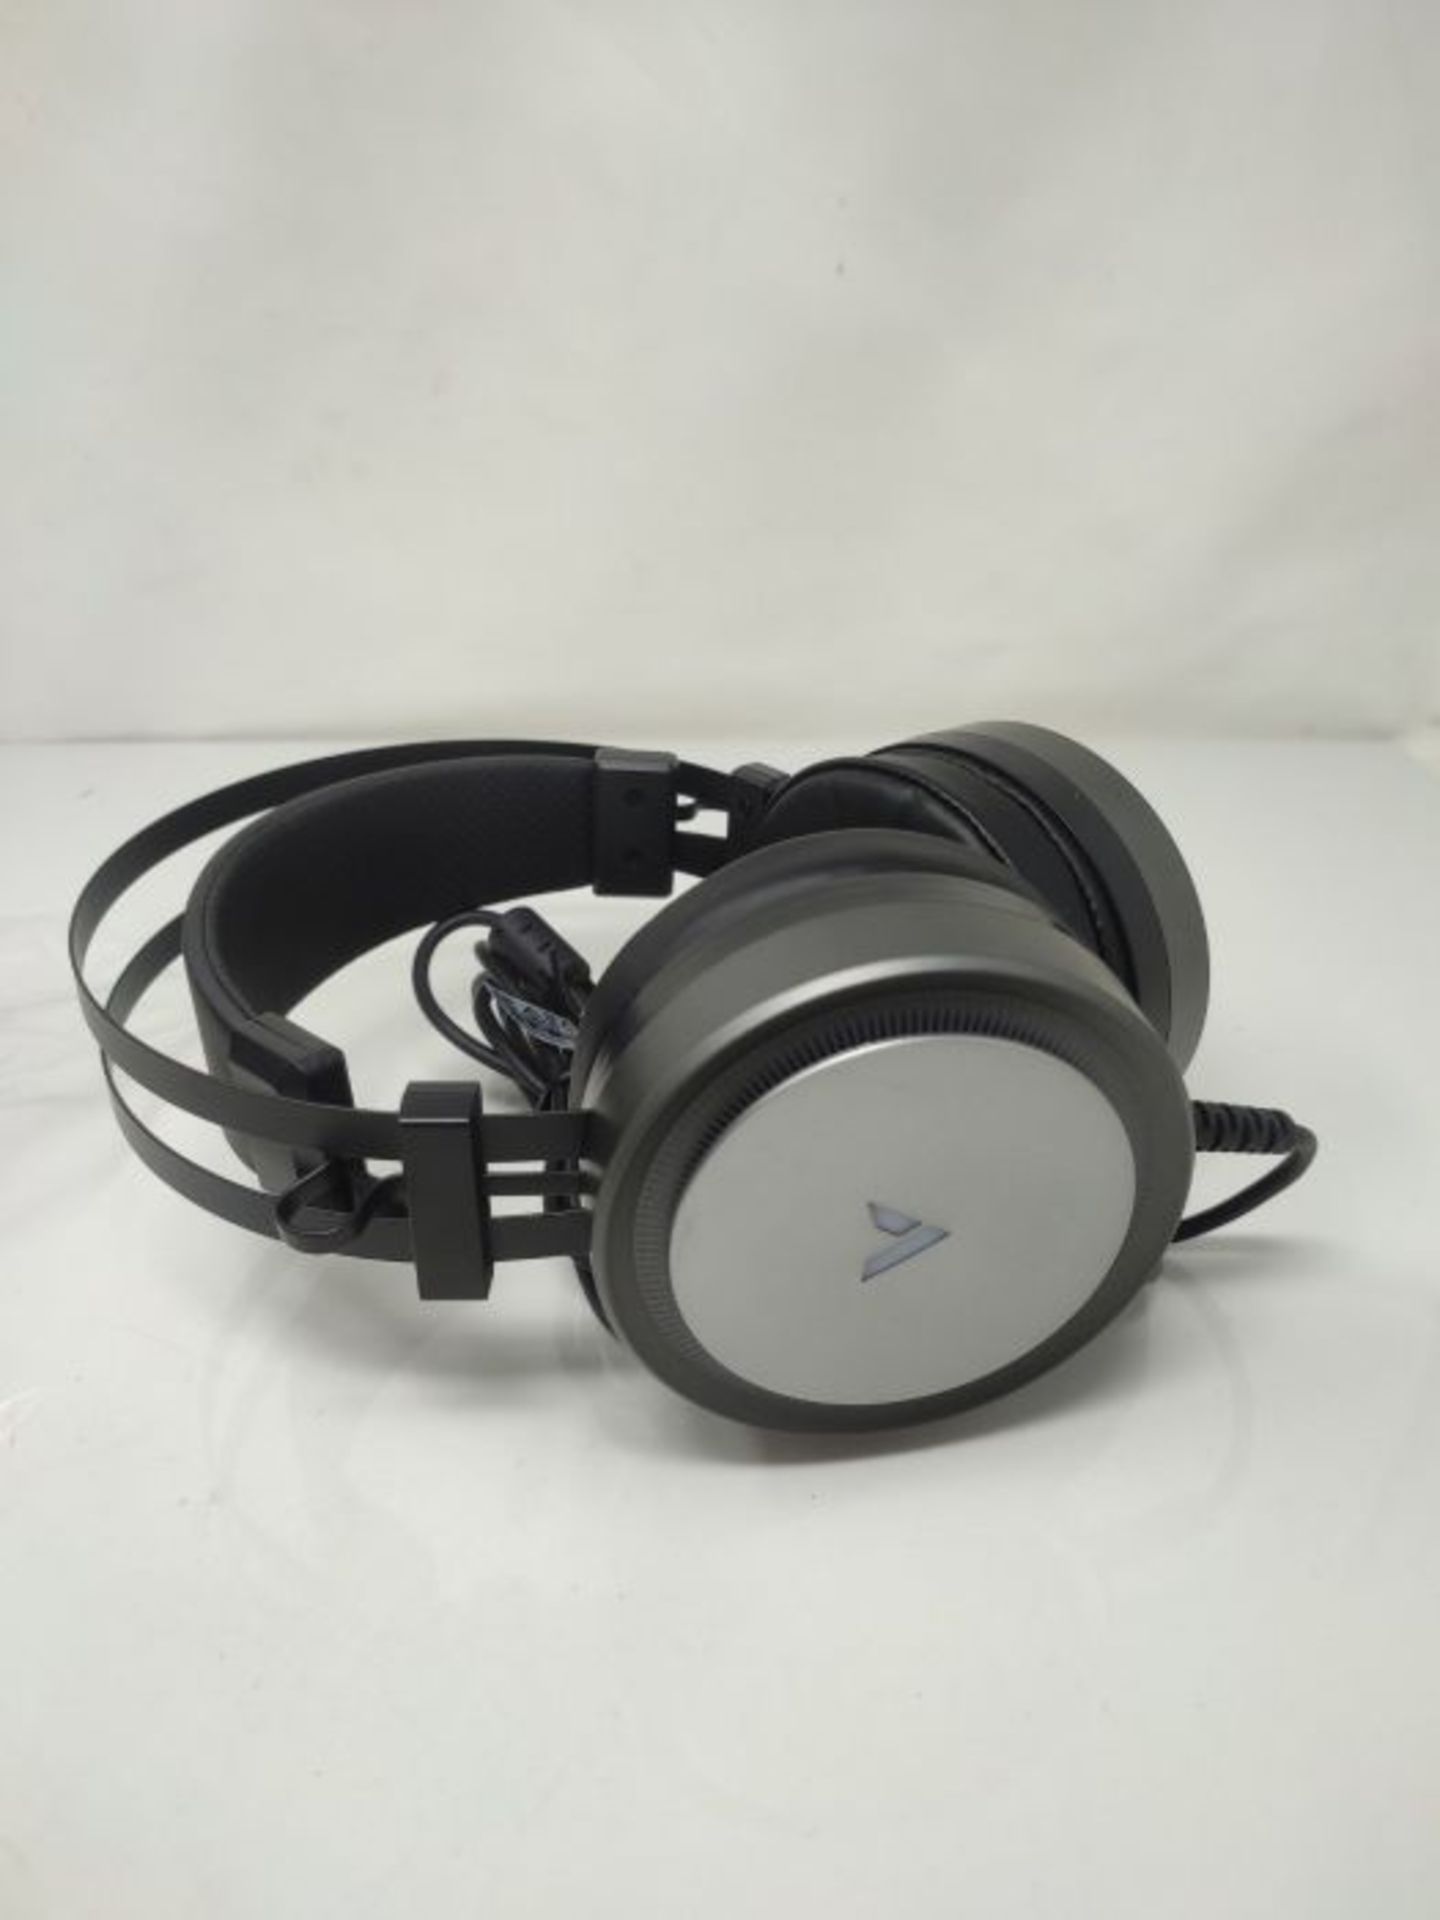 Rapoo VPRO VH530 Gaming Headset, 7.1 Channel virtuell, Surround Sound, ger??uschunte - Image 3 of 3